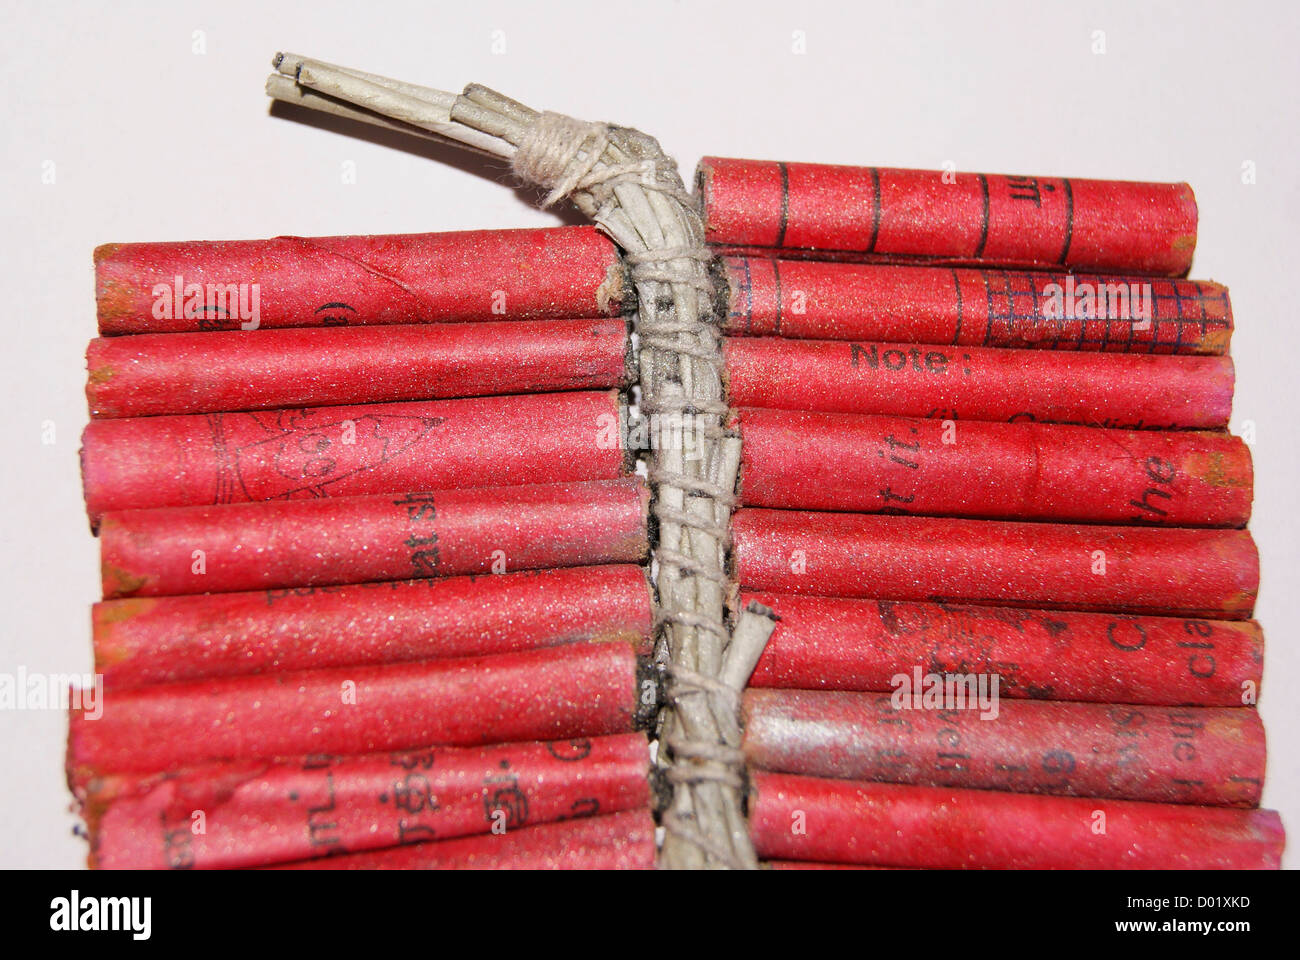 Red Chain firecrackers (chains of Fire cracker) closeup view from Deepavali Festival in India Stock Photo